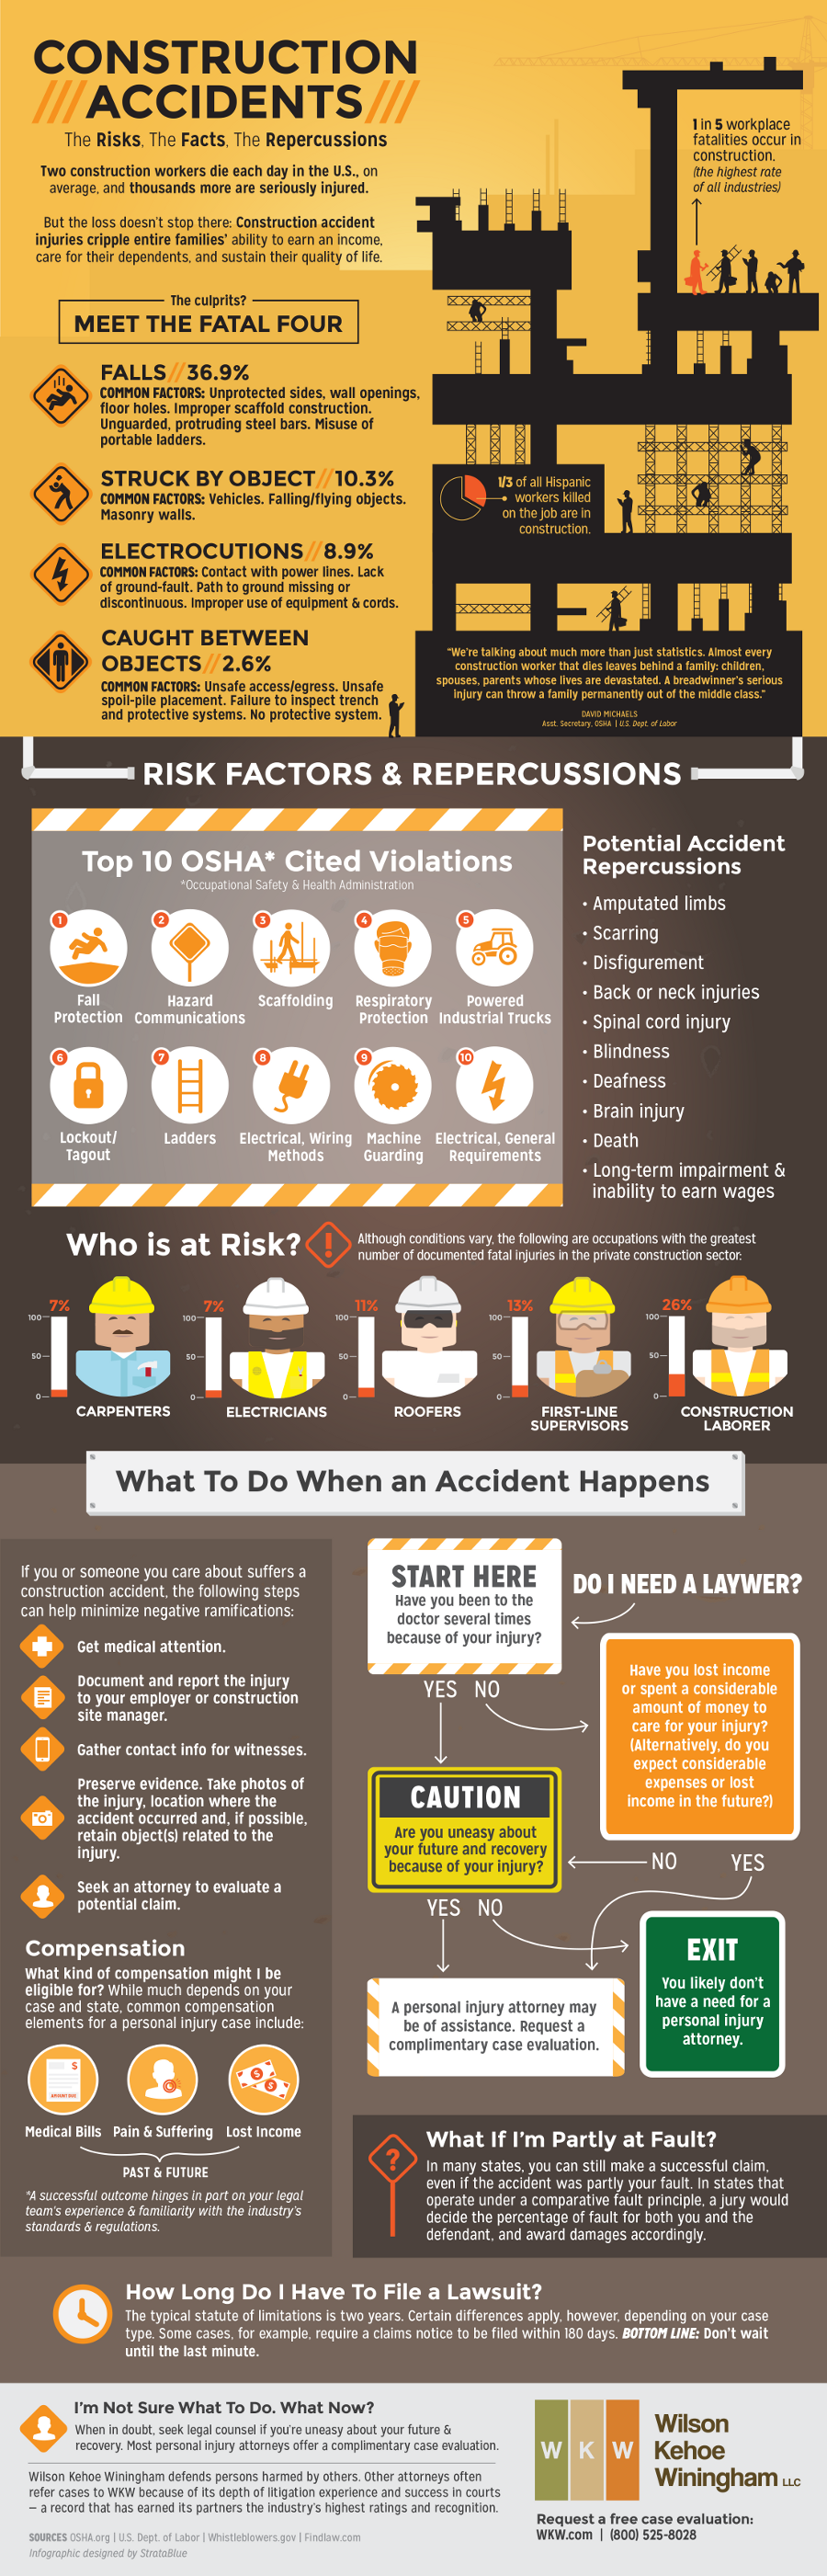 Construction Accidents: The Risks, the Facts, the Repercussions